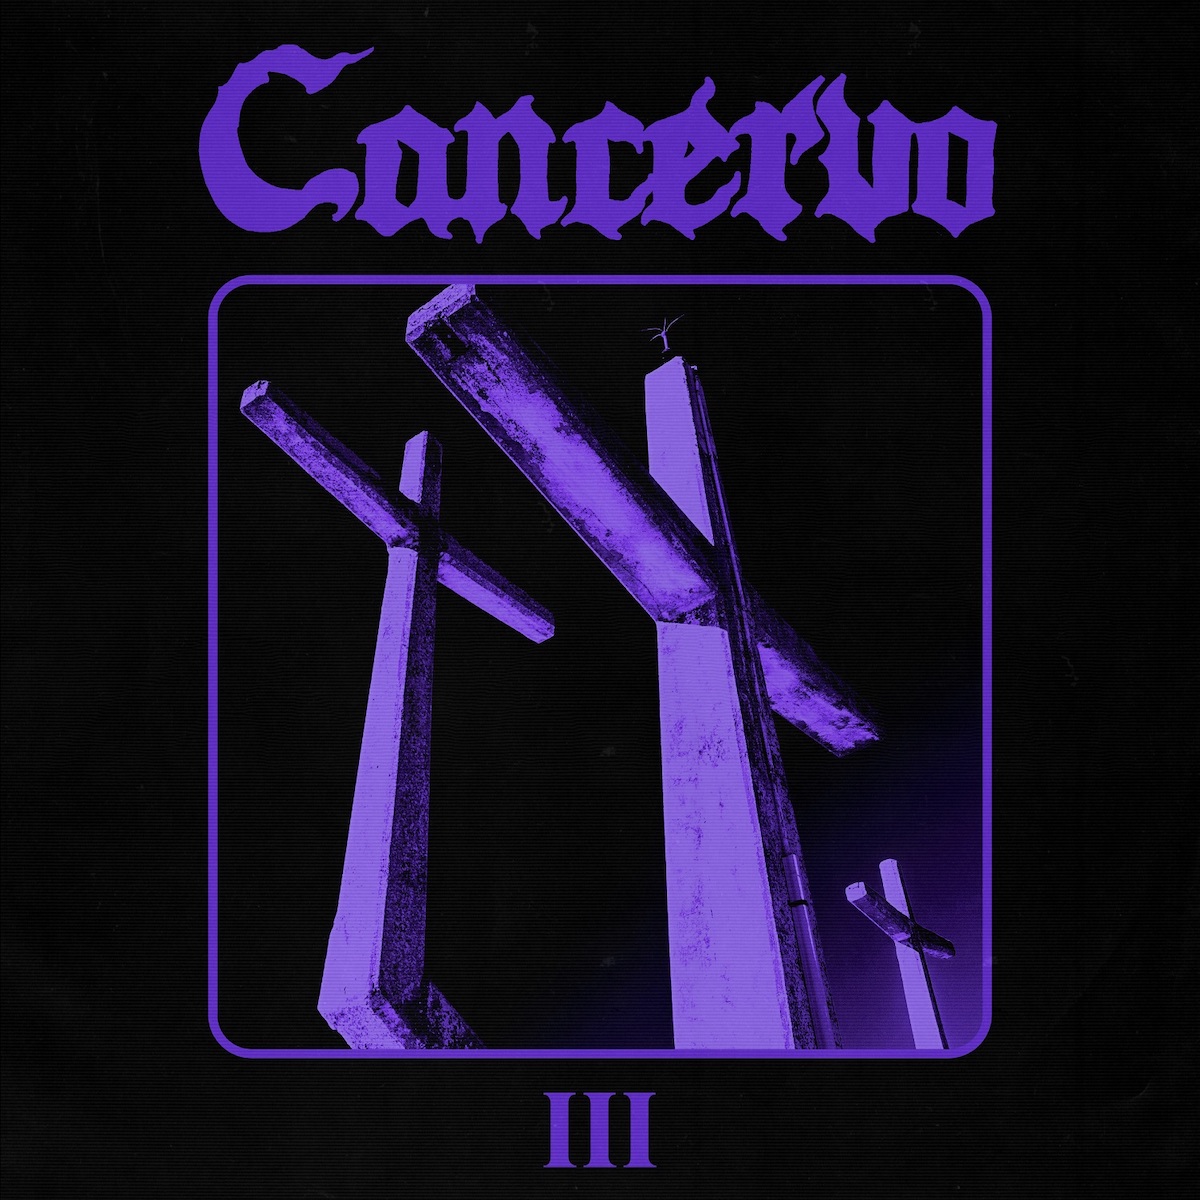 ALBUM REVIEW: III by Cancervo